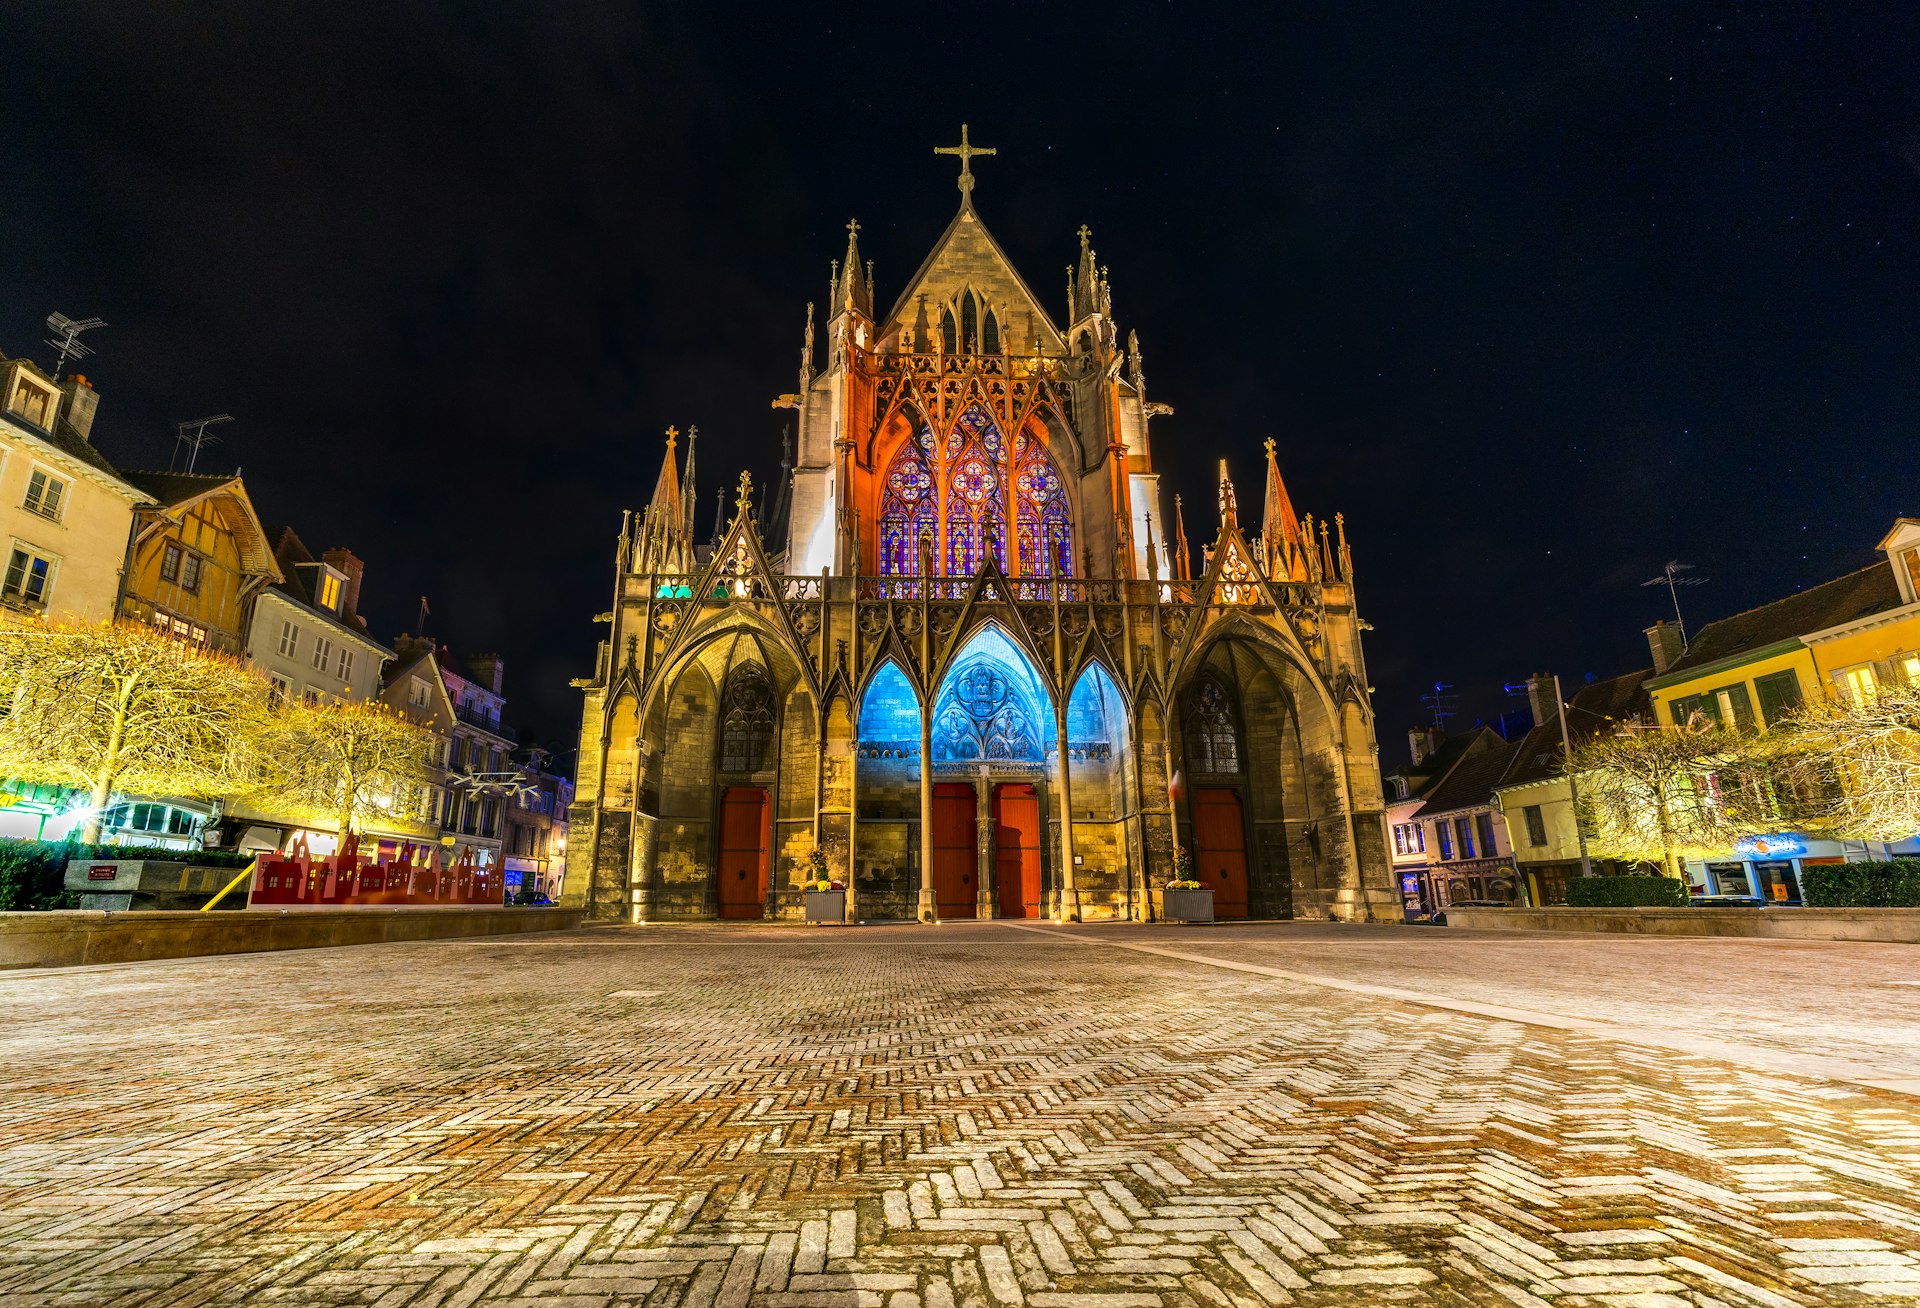 Gothic exterior of a basilica on the edge of a square all lit up at night